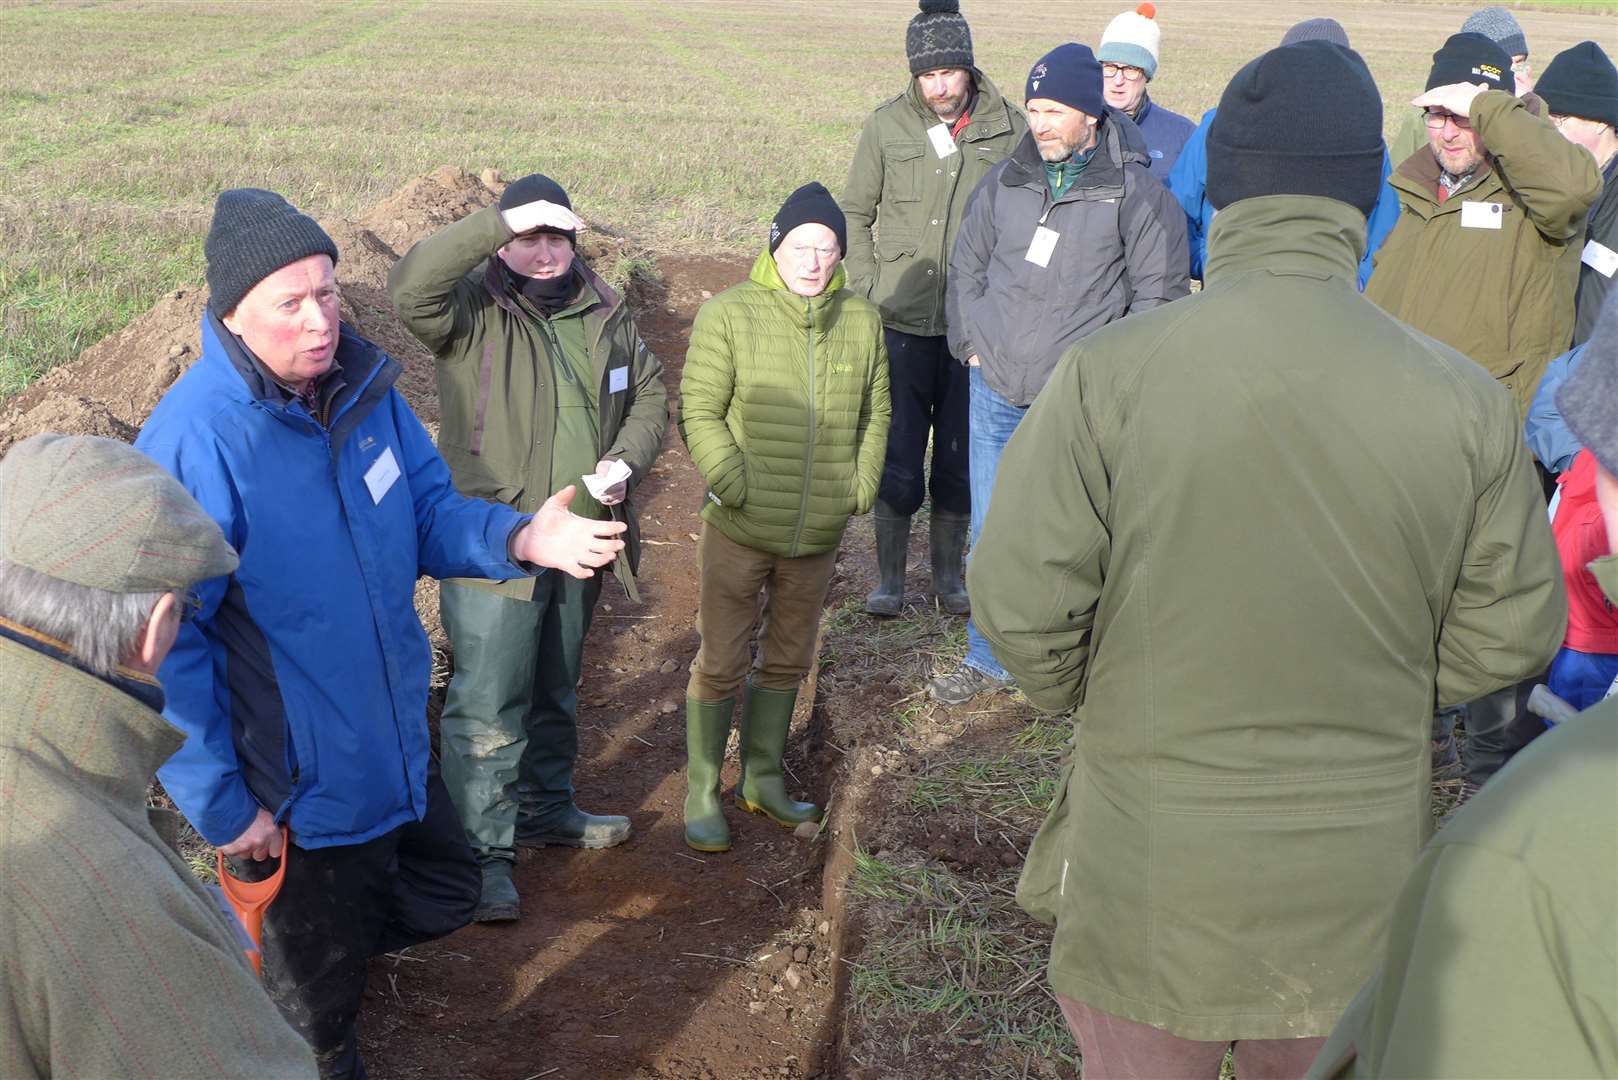 Over 100 farmers attended the Regenerative Soil Open Day at Backboath Farm in Angus.